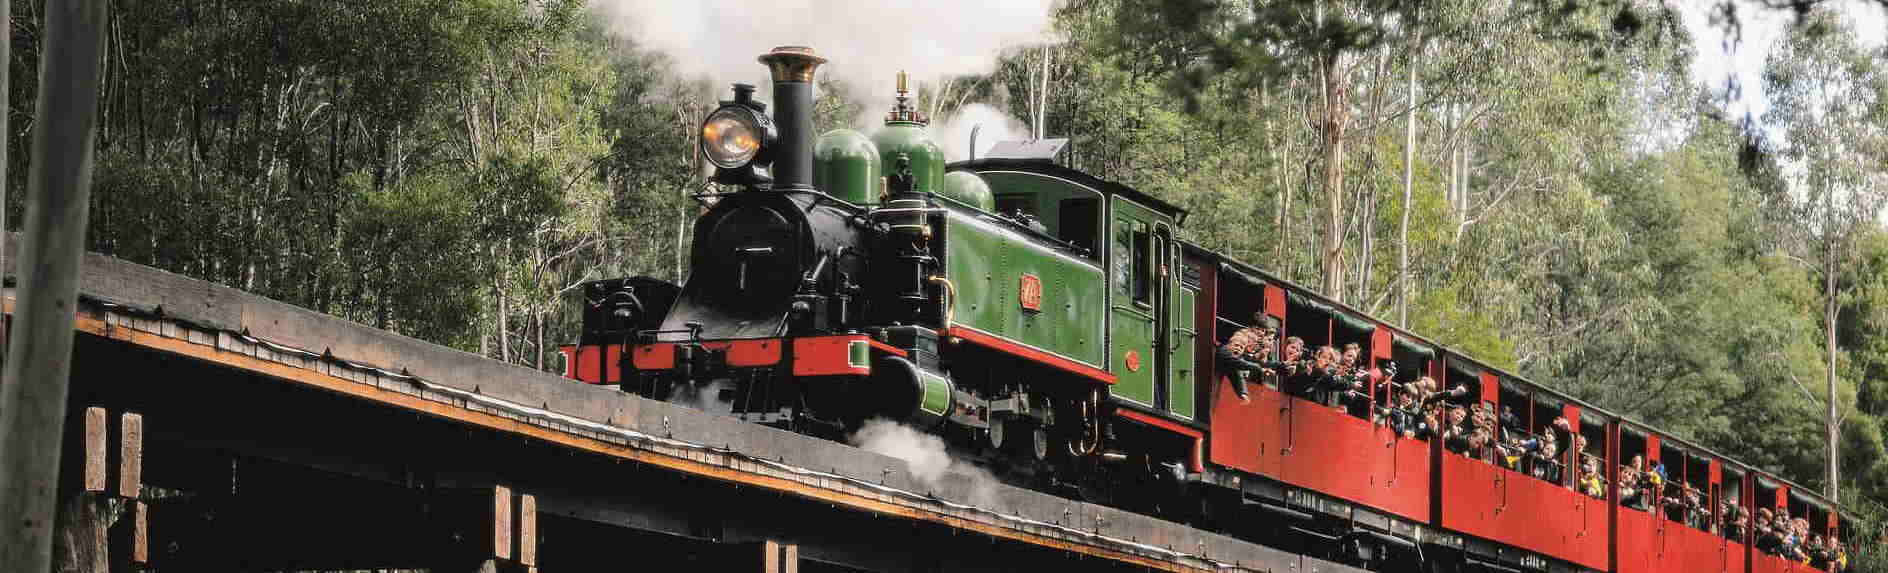 Puffing Billy Tours